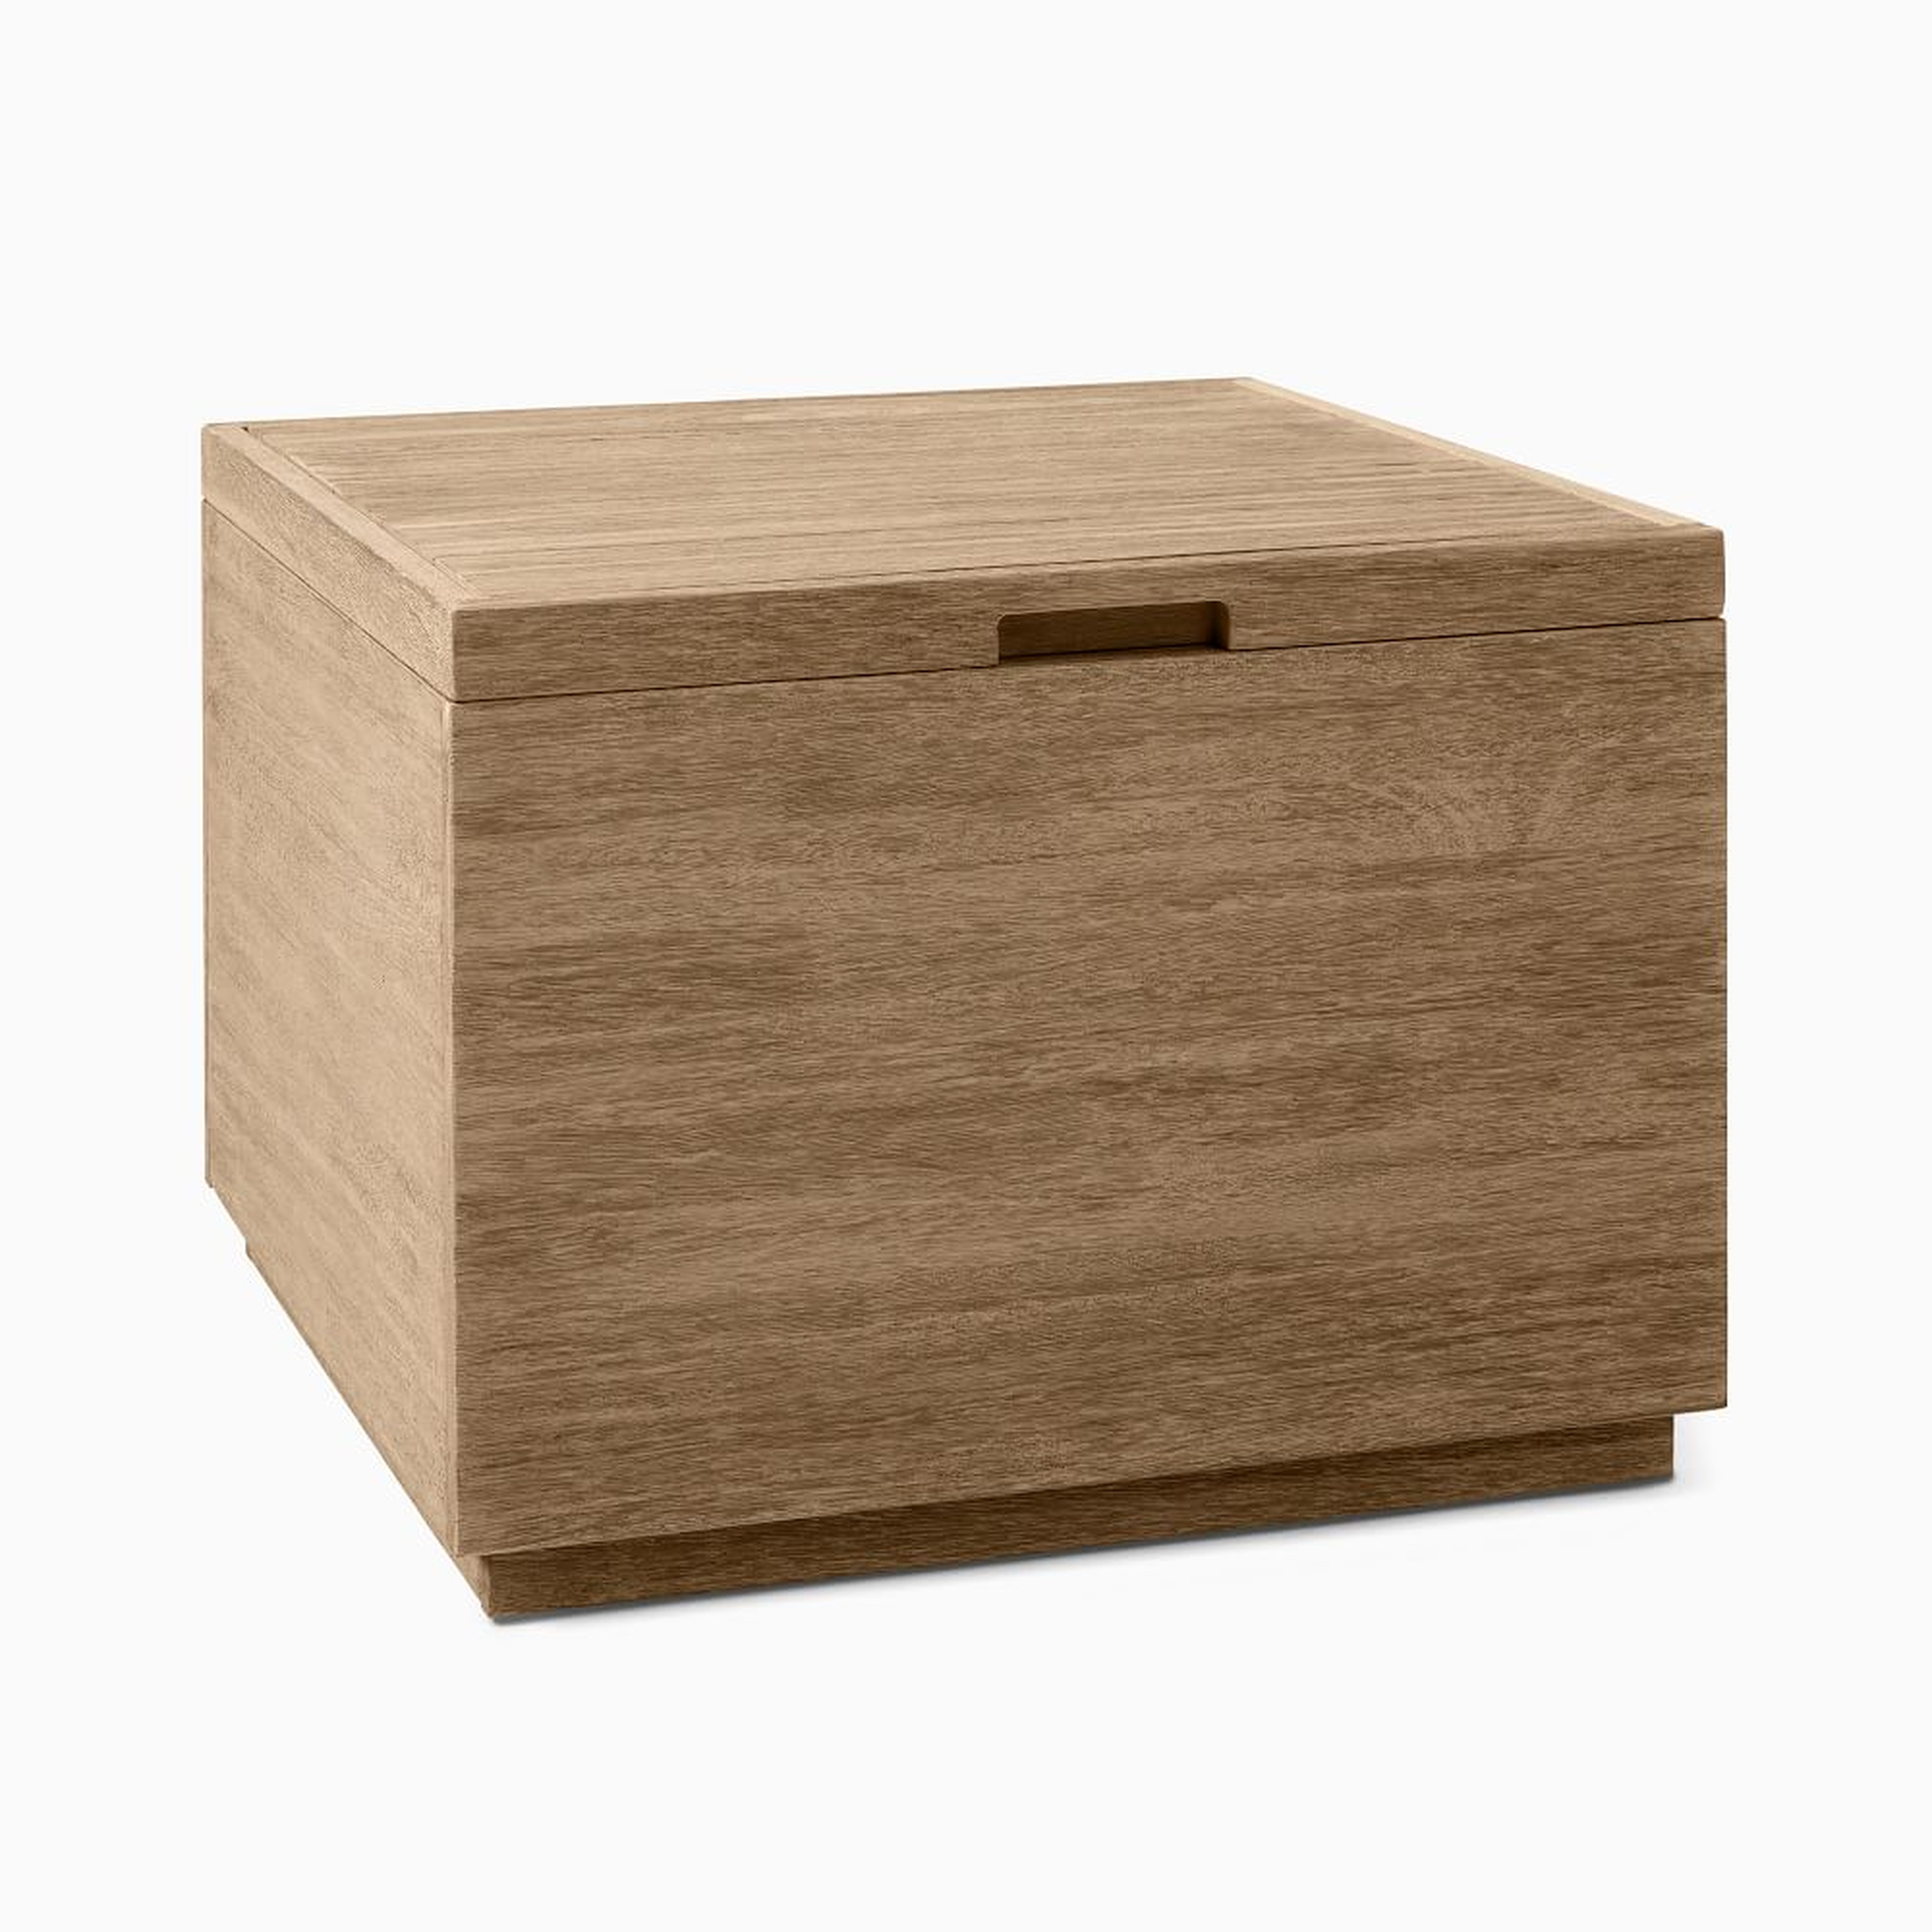 Volume Outdoor Slatted Side Table, Square With Storage, Driftwood - West Elm